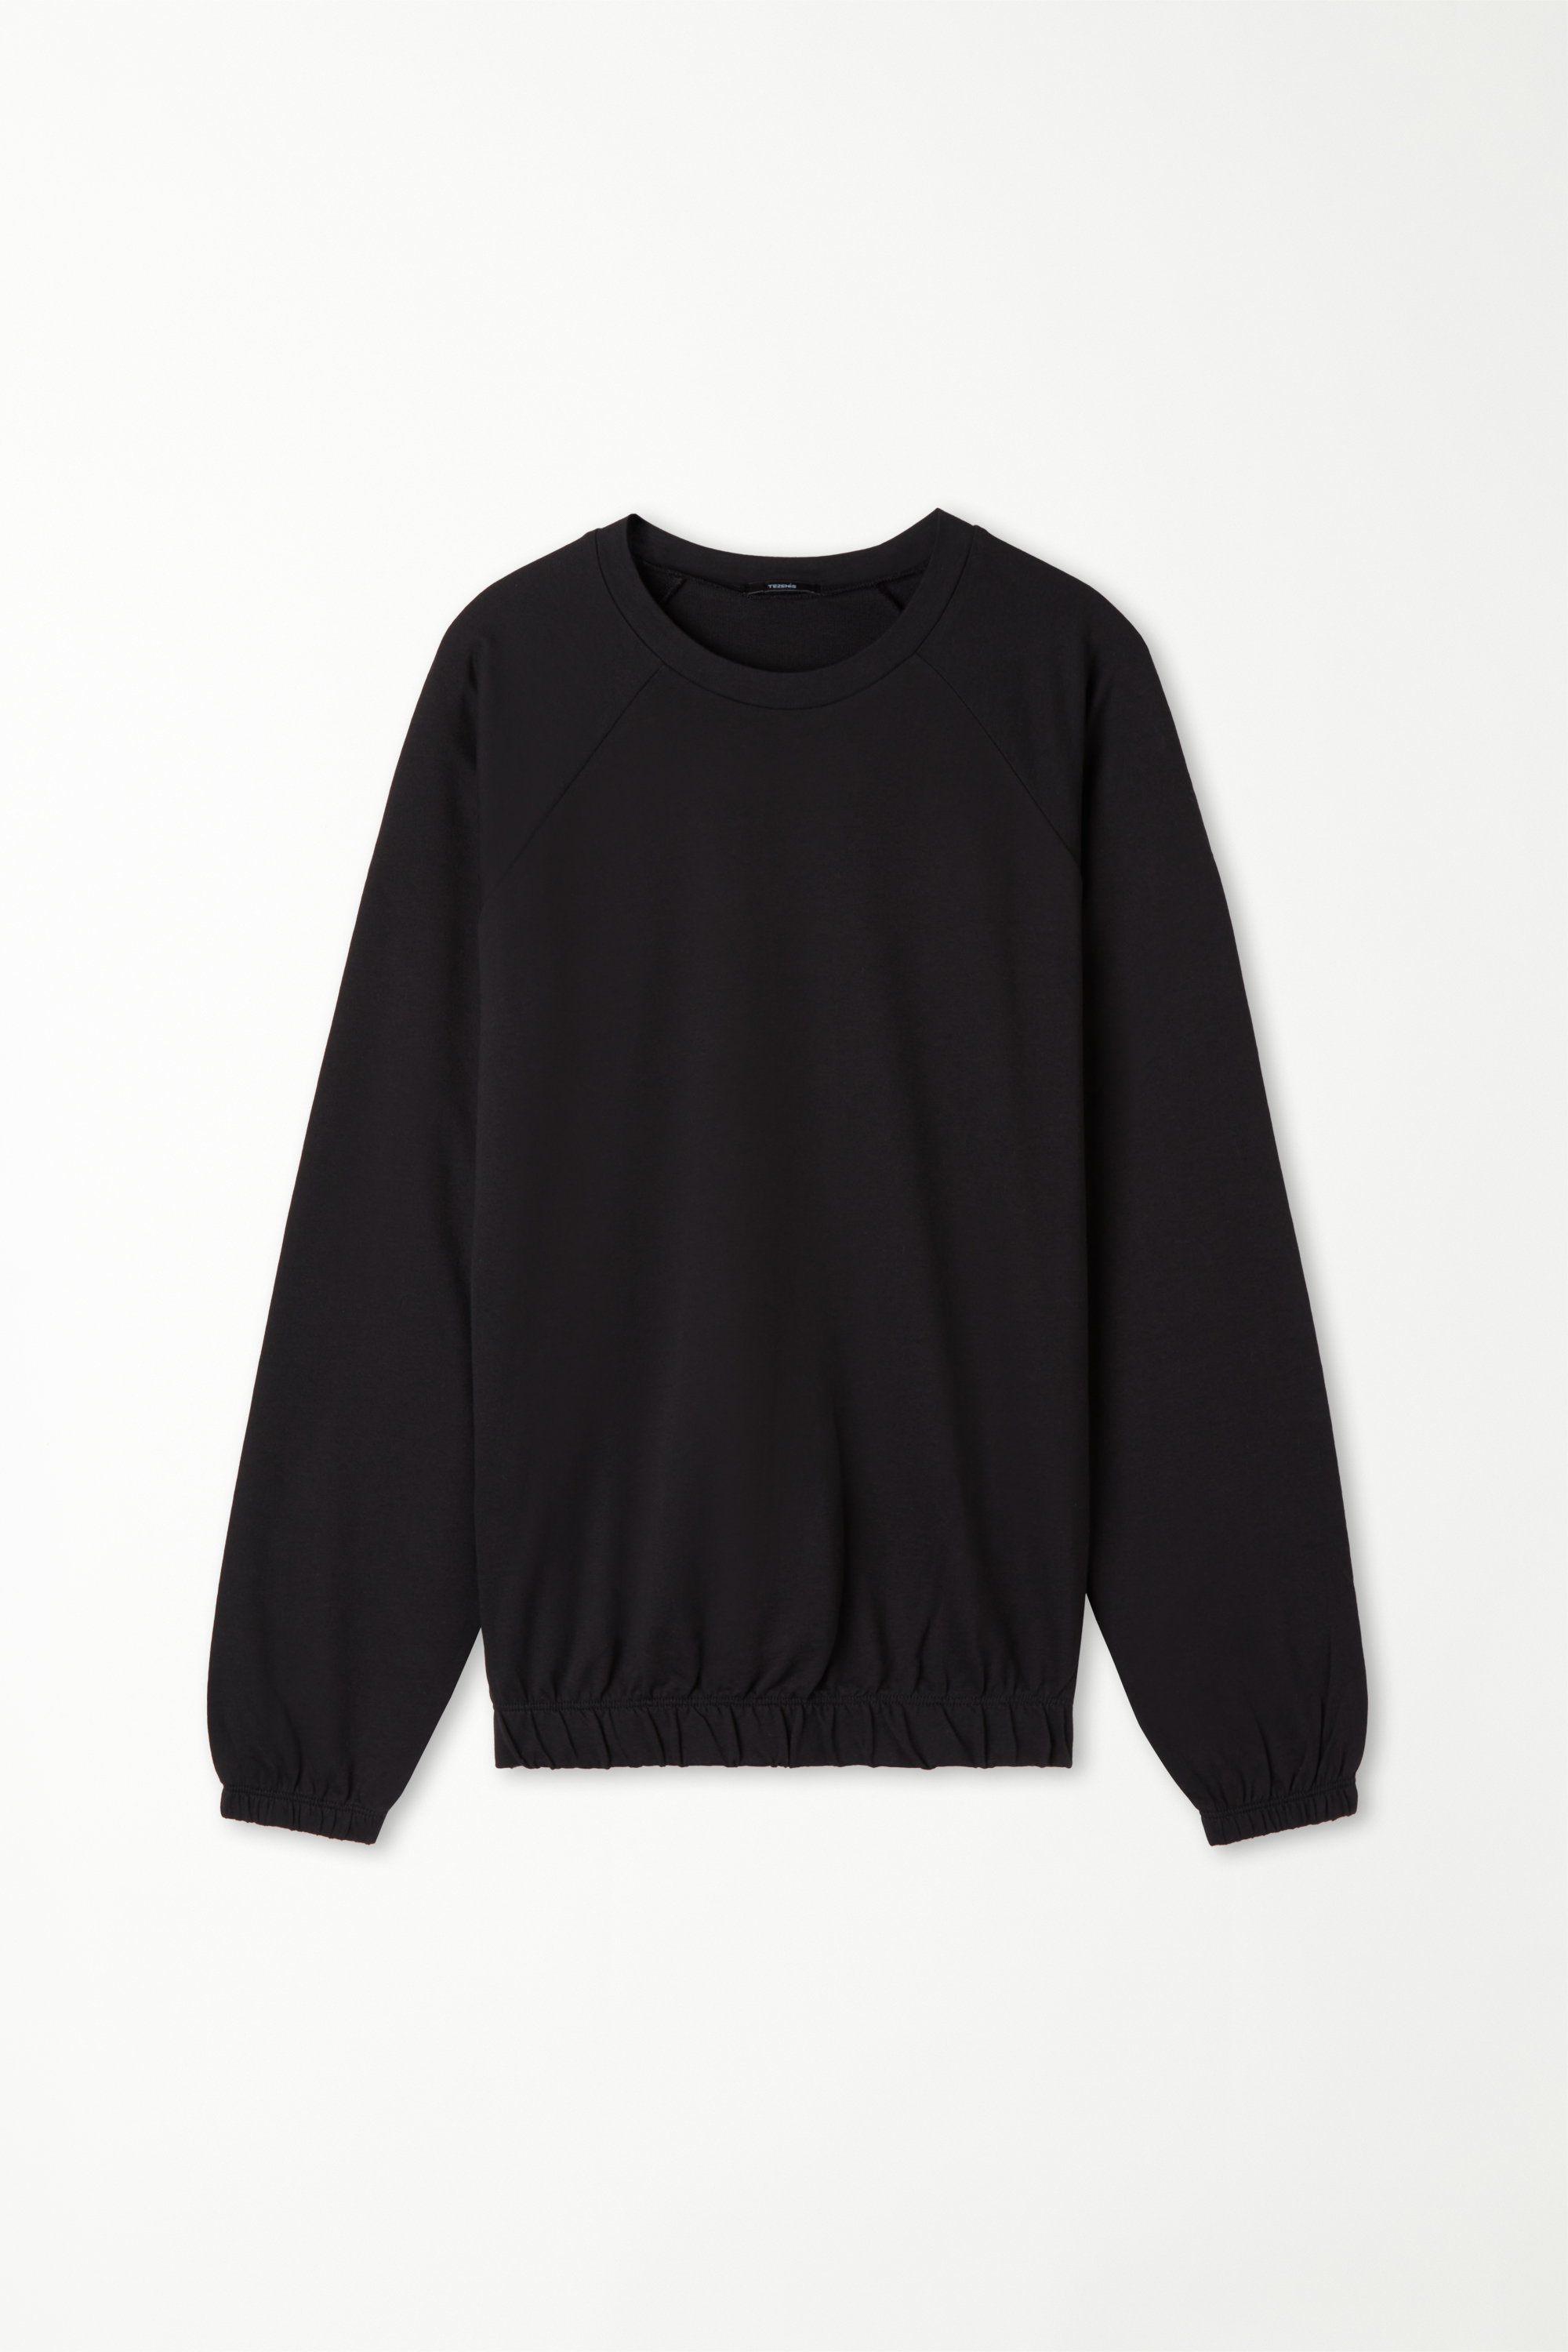 Long-Sleeved Rounded Neck Top with Cuffs